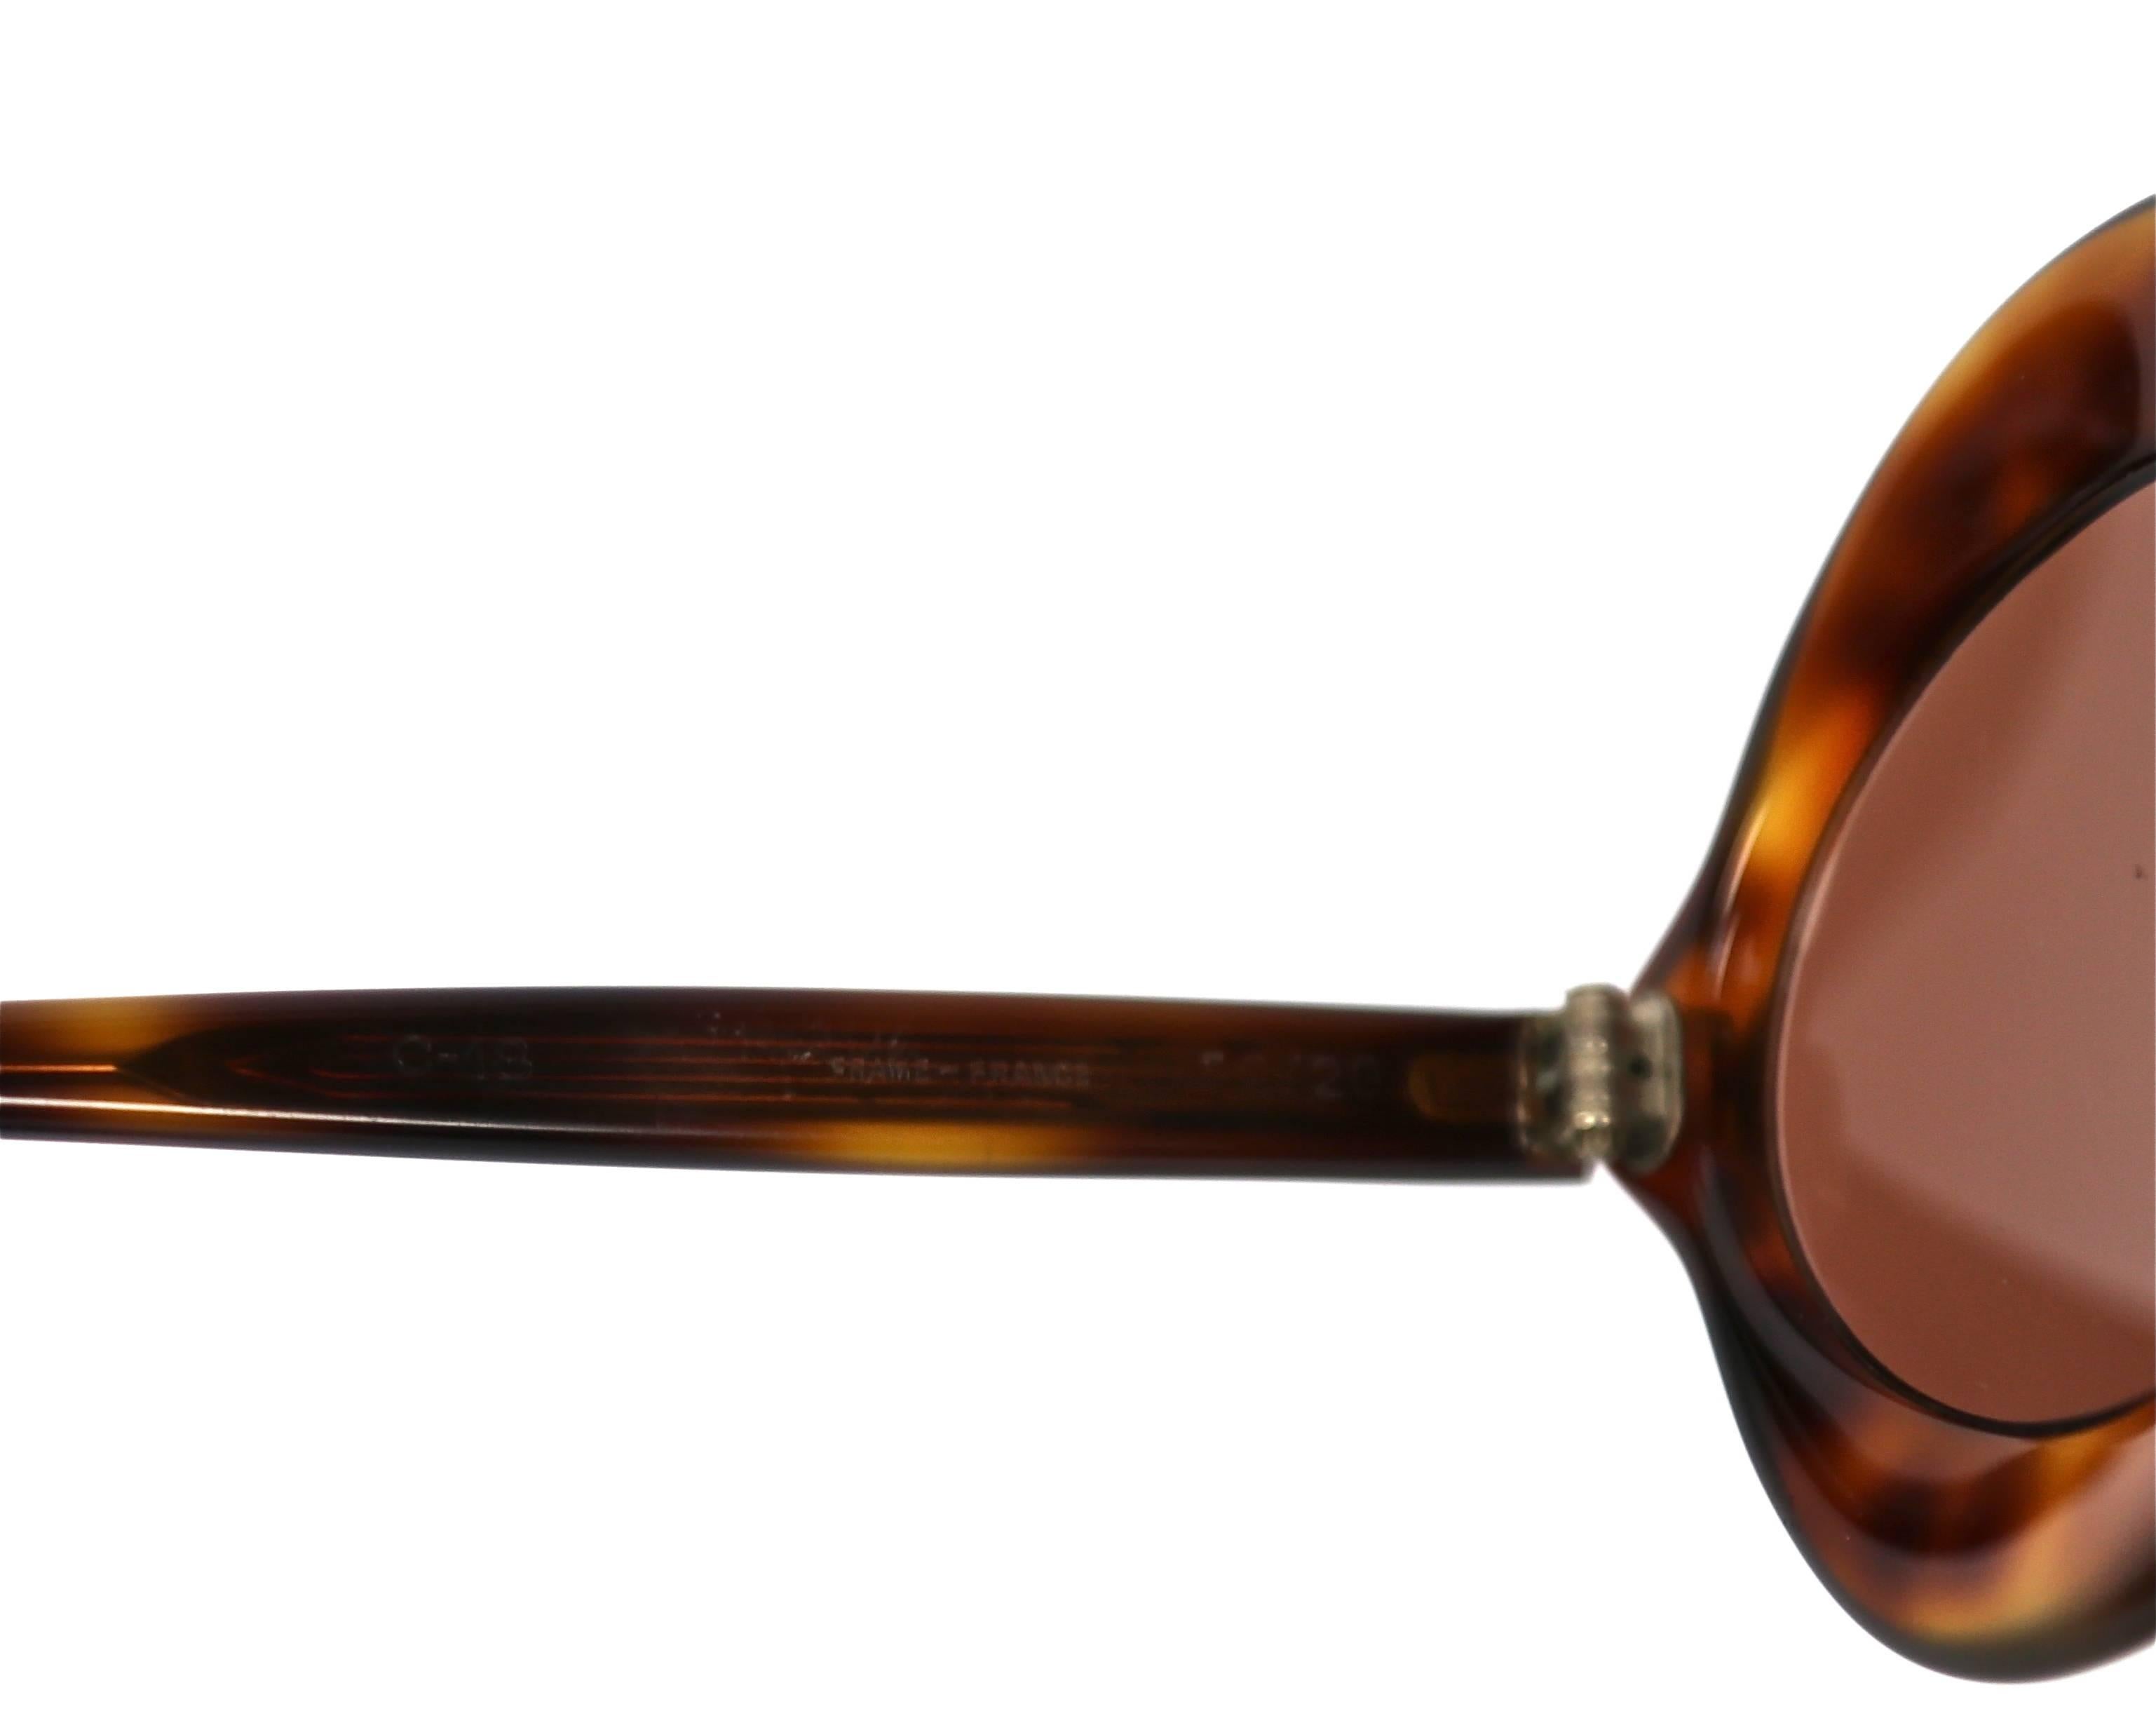 Very rare tortoise round sunglasses with frames in the shape of lips designed by Pierre Cardin dating to the 1970's. Fit a small to medium sized face. Made in France. Very good condition. 